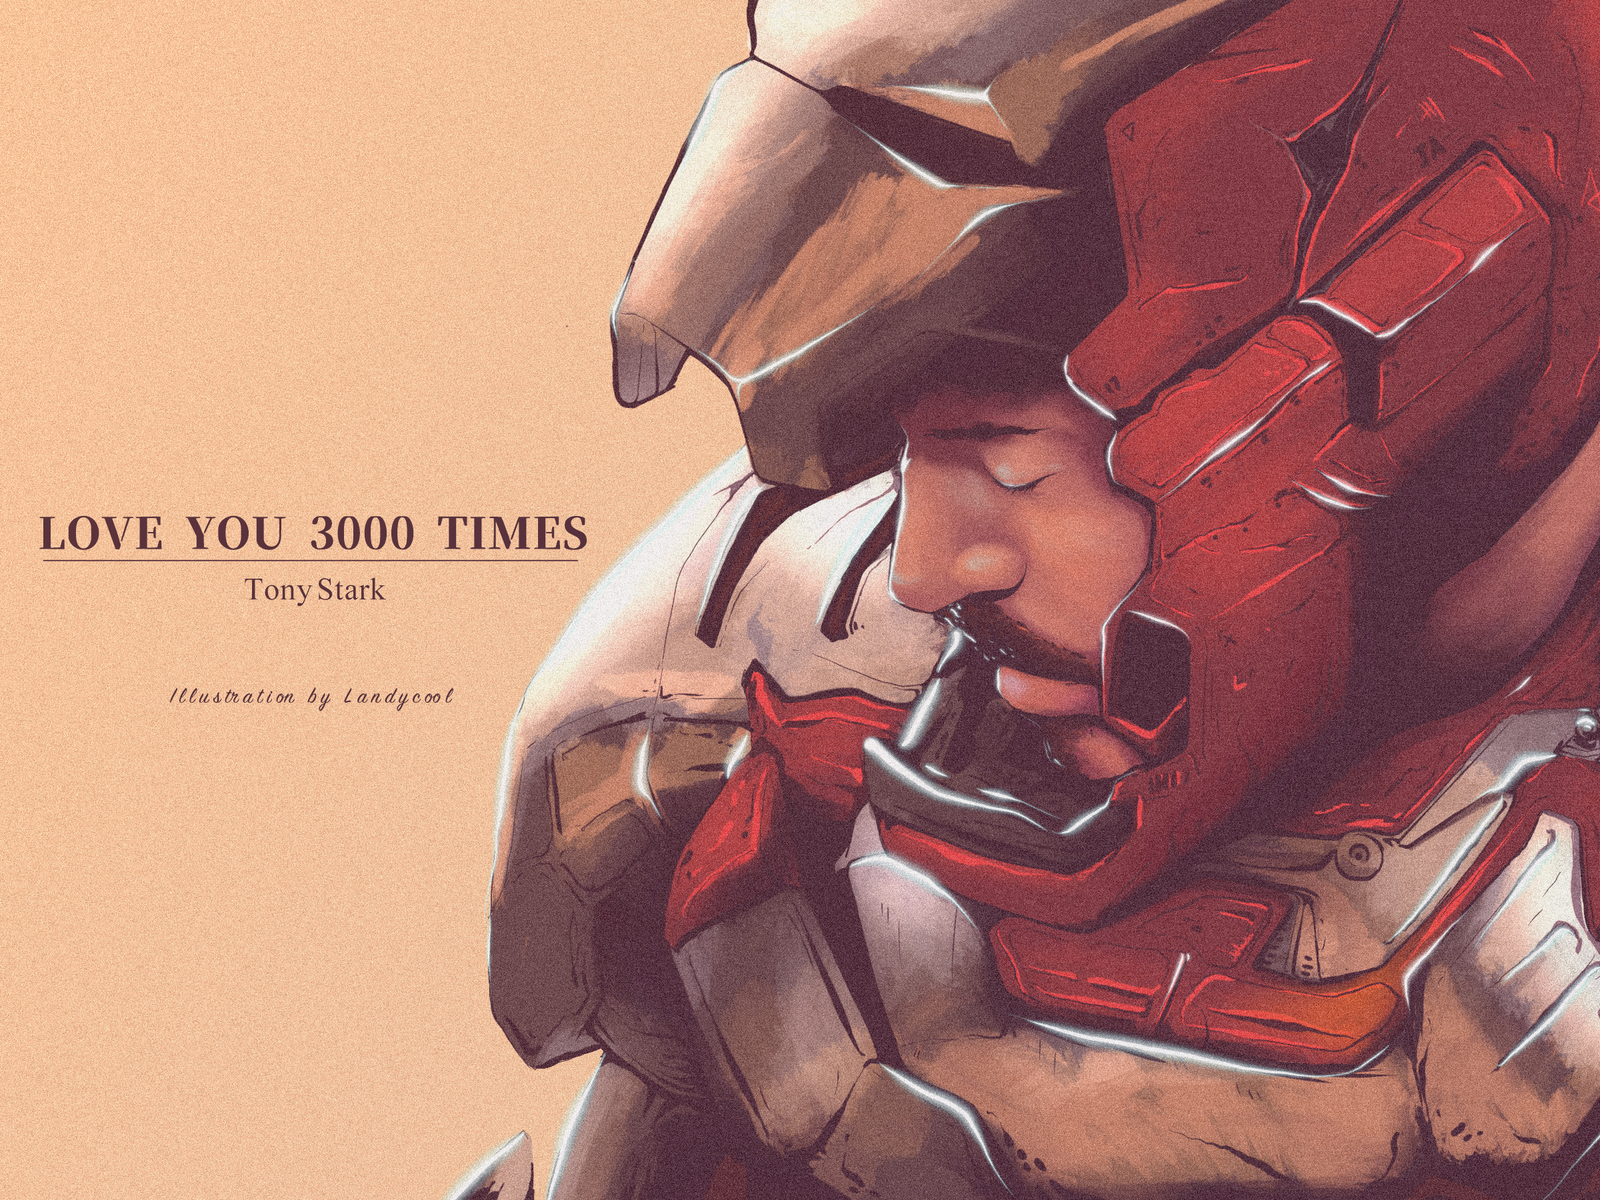 Love you 20 times by LandyCooL for RaDesign on Dribbble